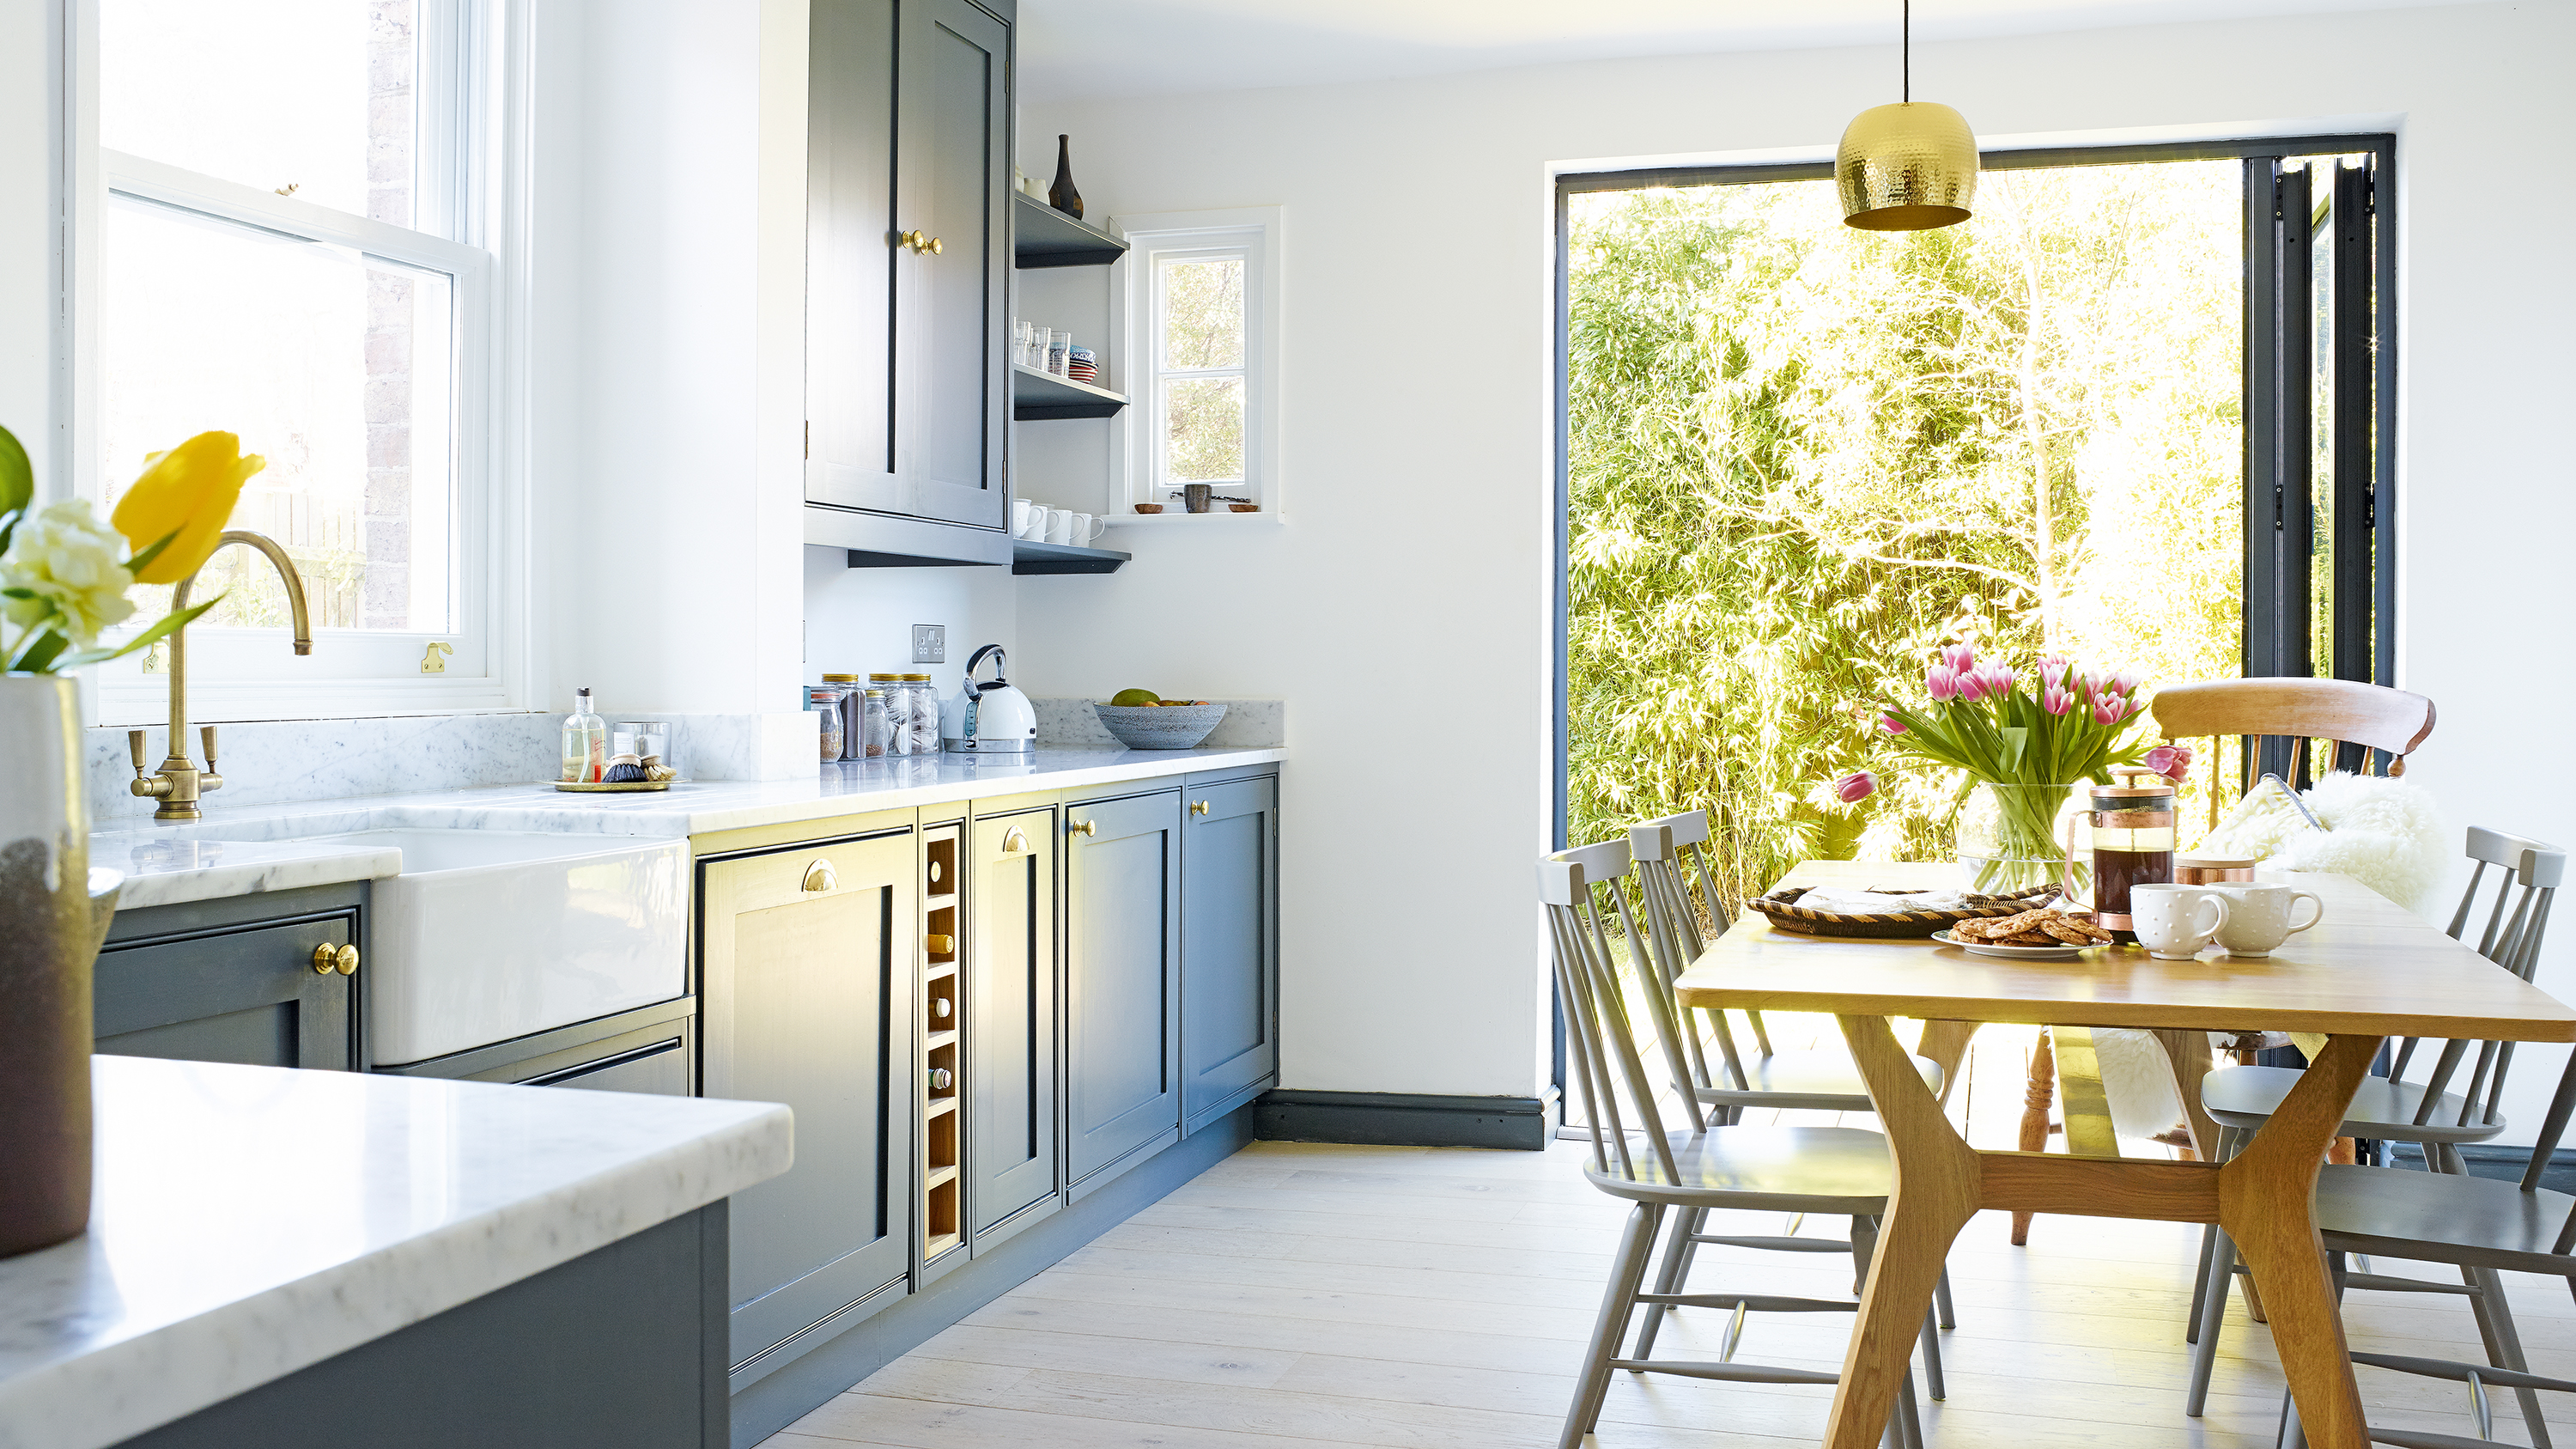 How to make a small kitchen look bigger – 20 expert tips and ...